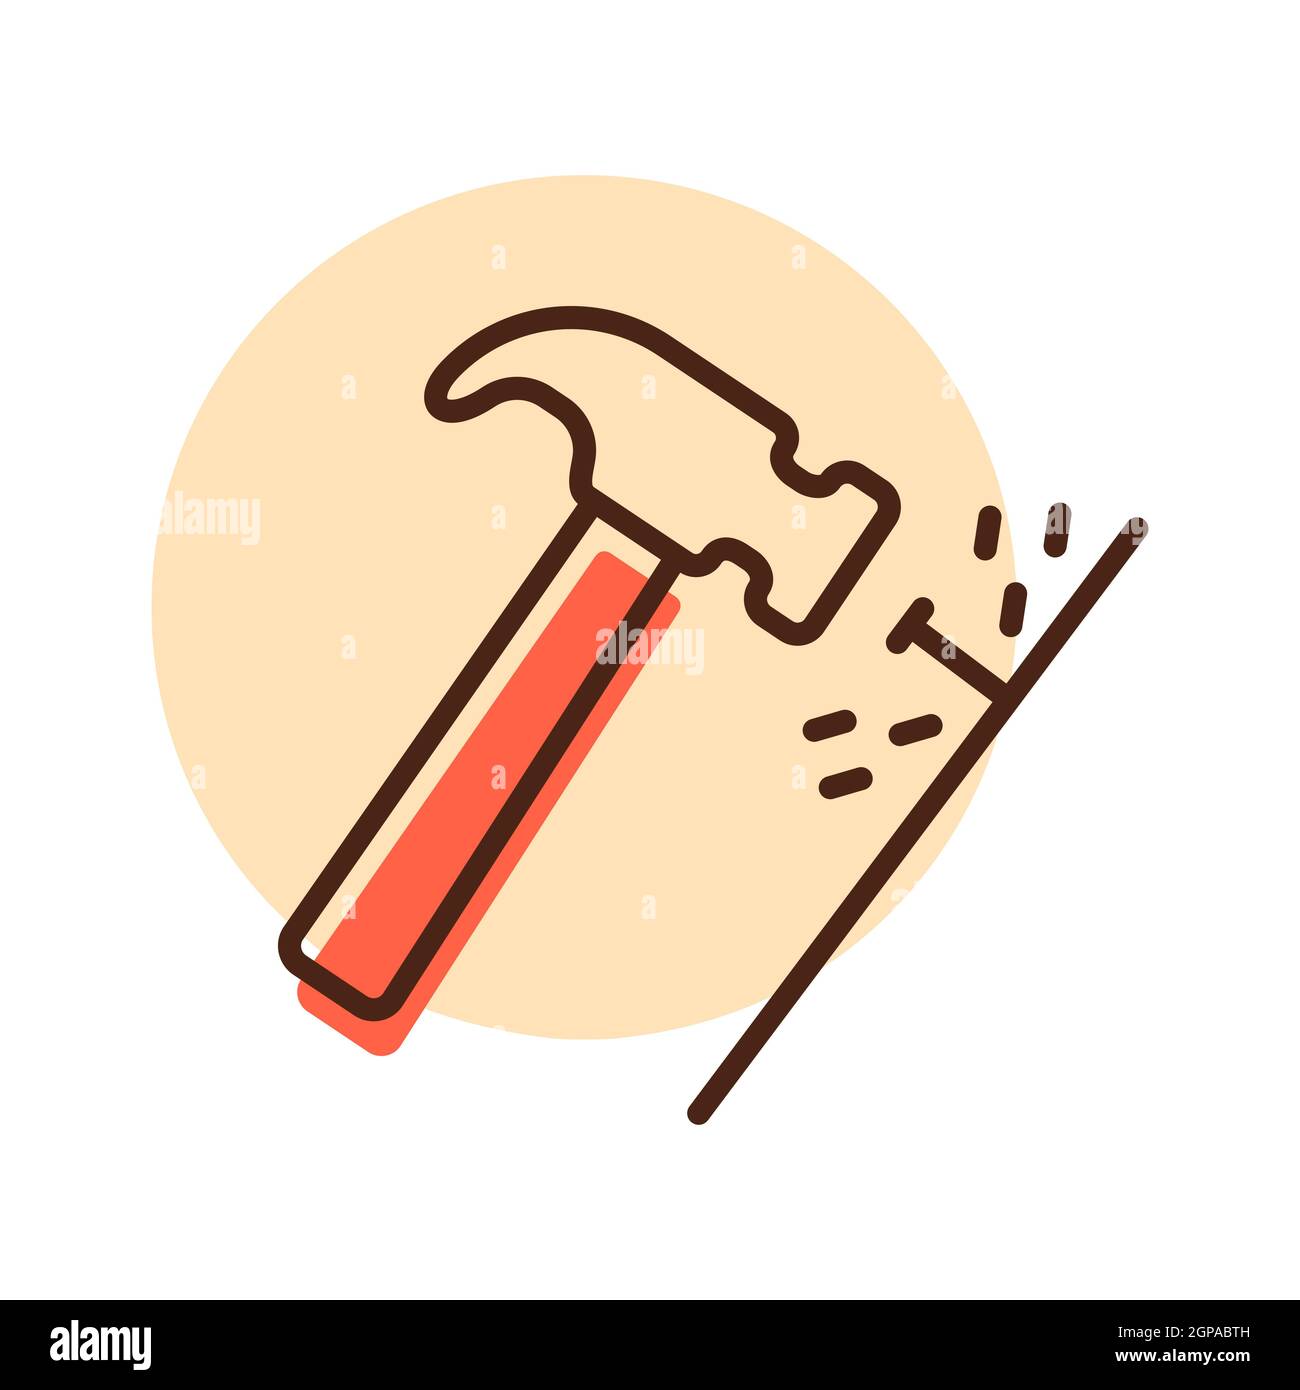 Hammer and nails vector flat icon. Construction, repair and